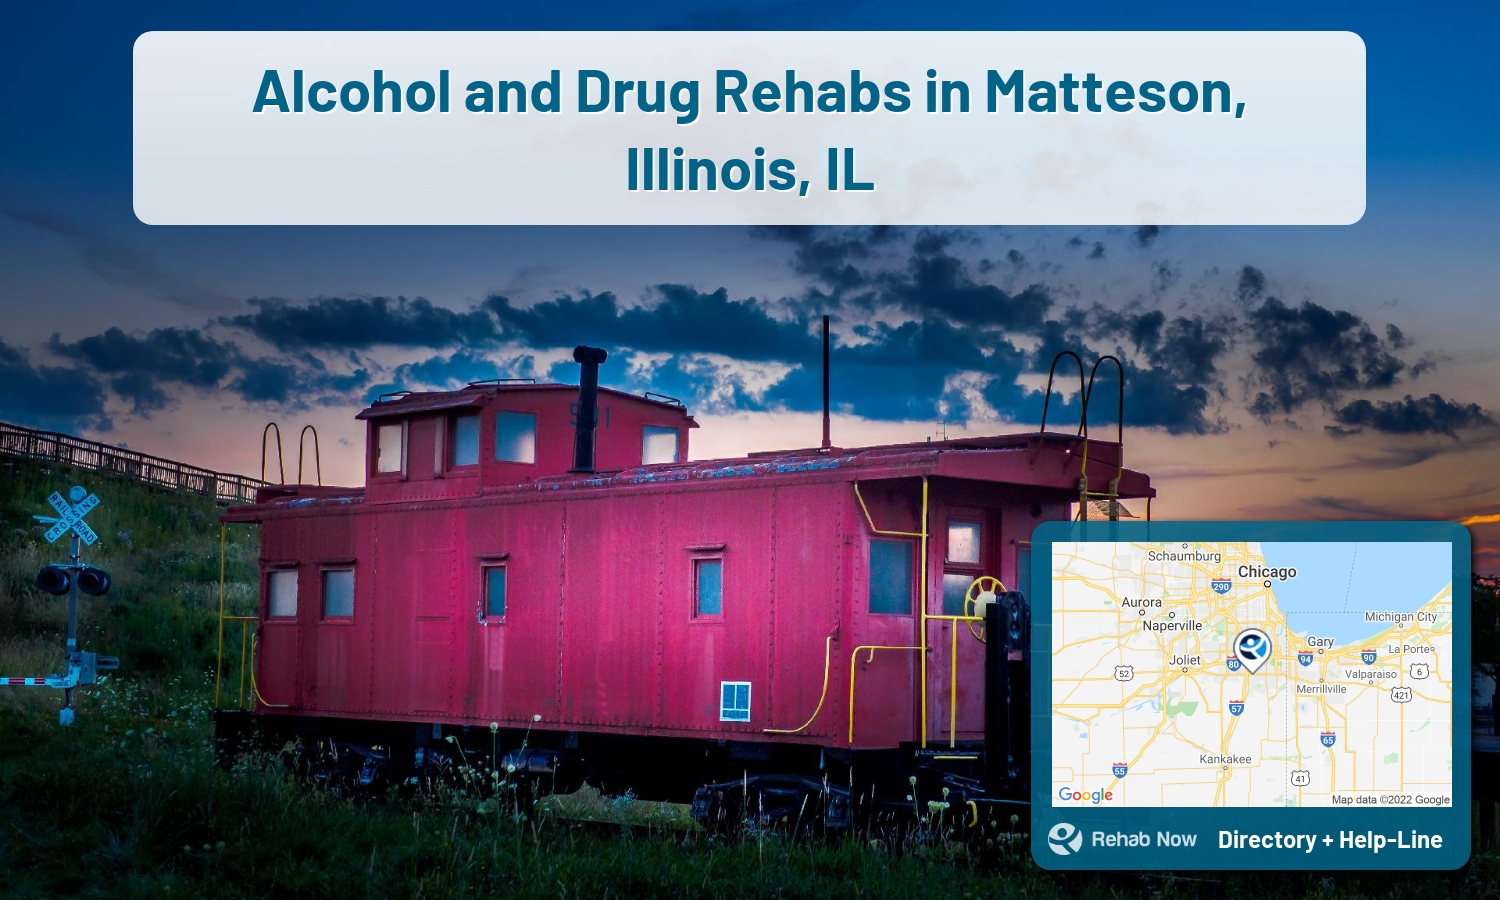 Matteson, IL Treatment Centers. Find drug rehab in Matteson, Illinois, or detox and treatment programs. Get the right help now!